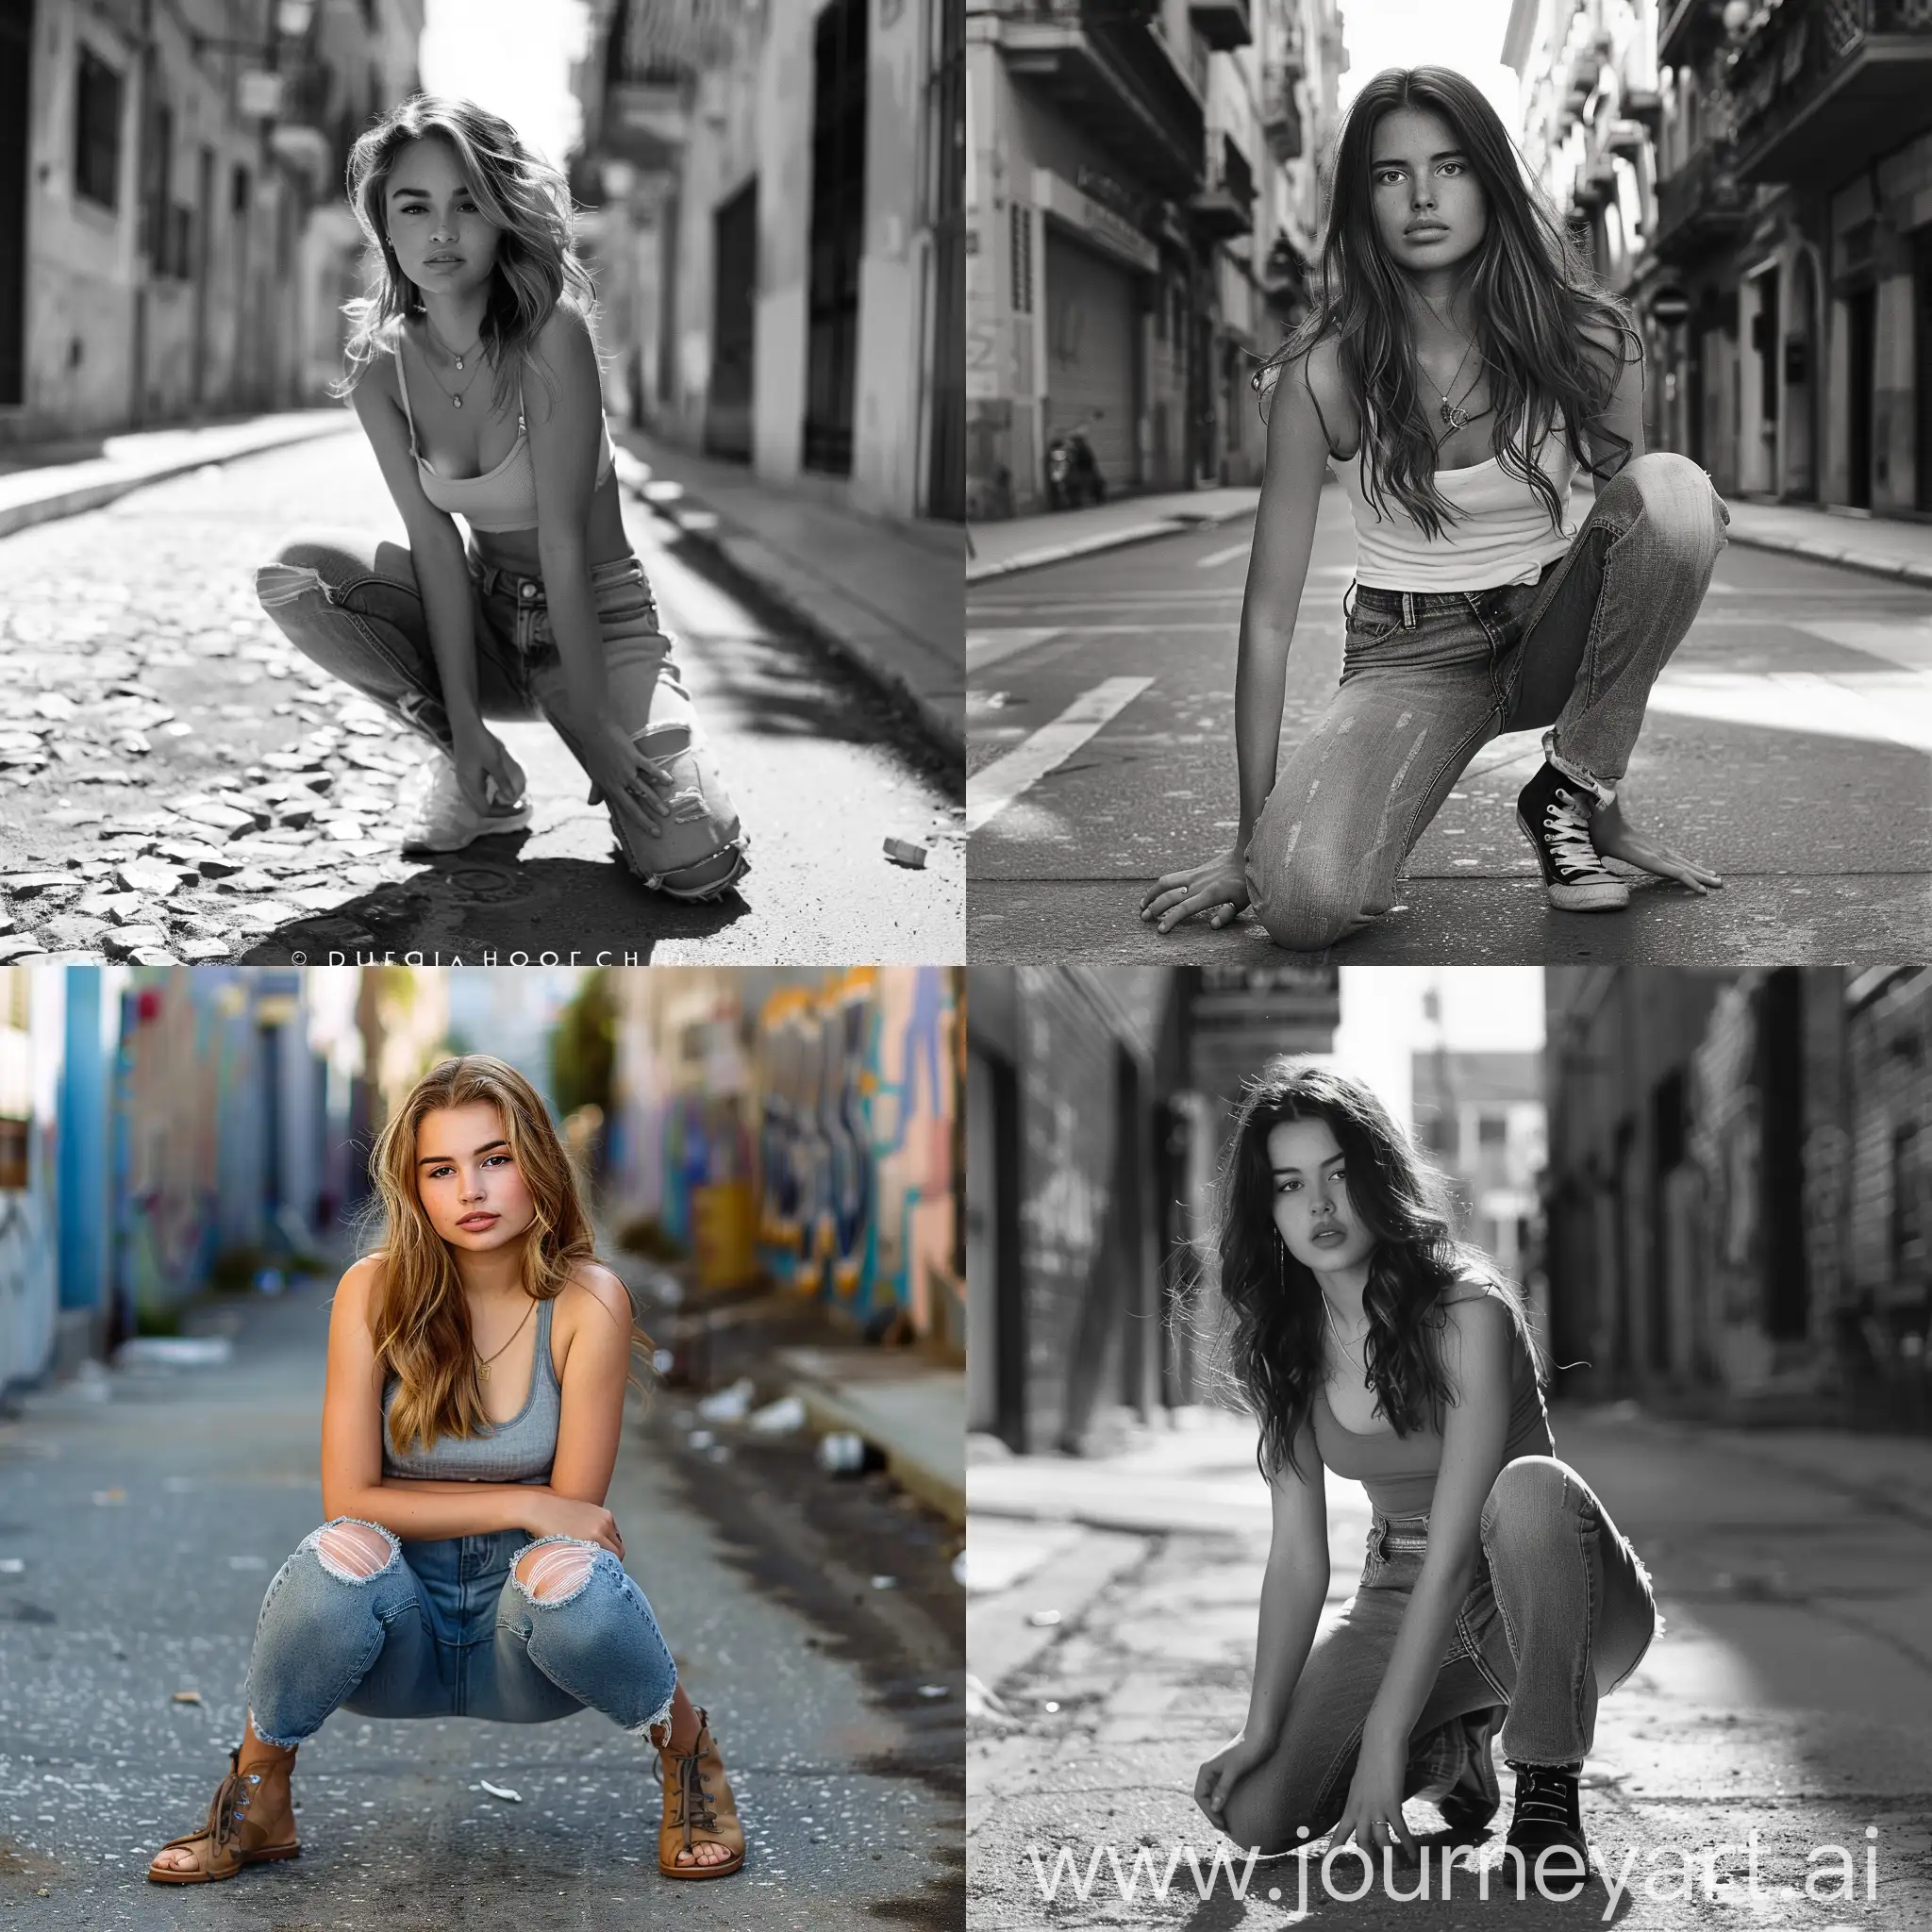 Young-Woman-Fashionably-Crouching-in-Urban-Setting